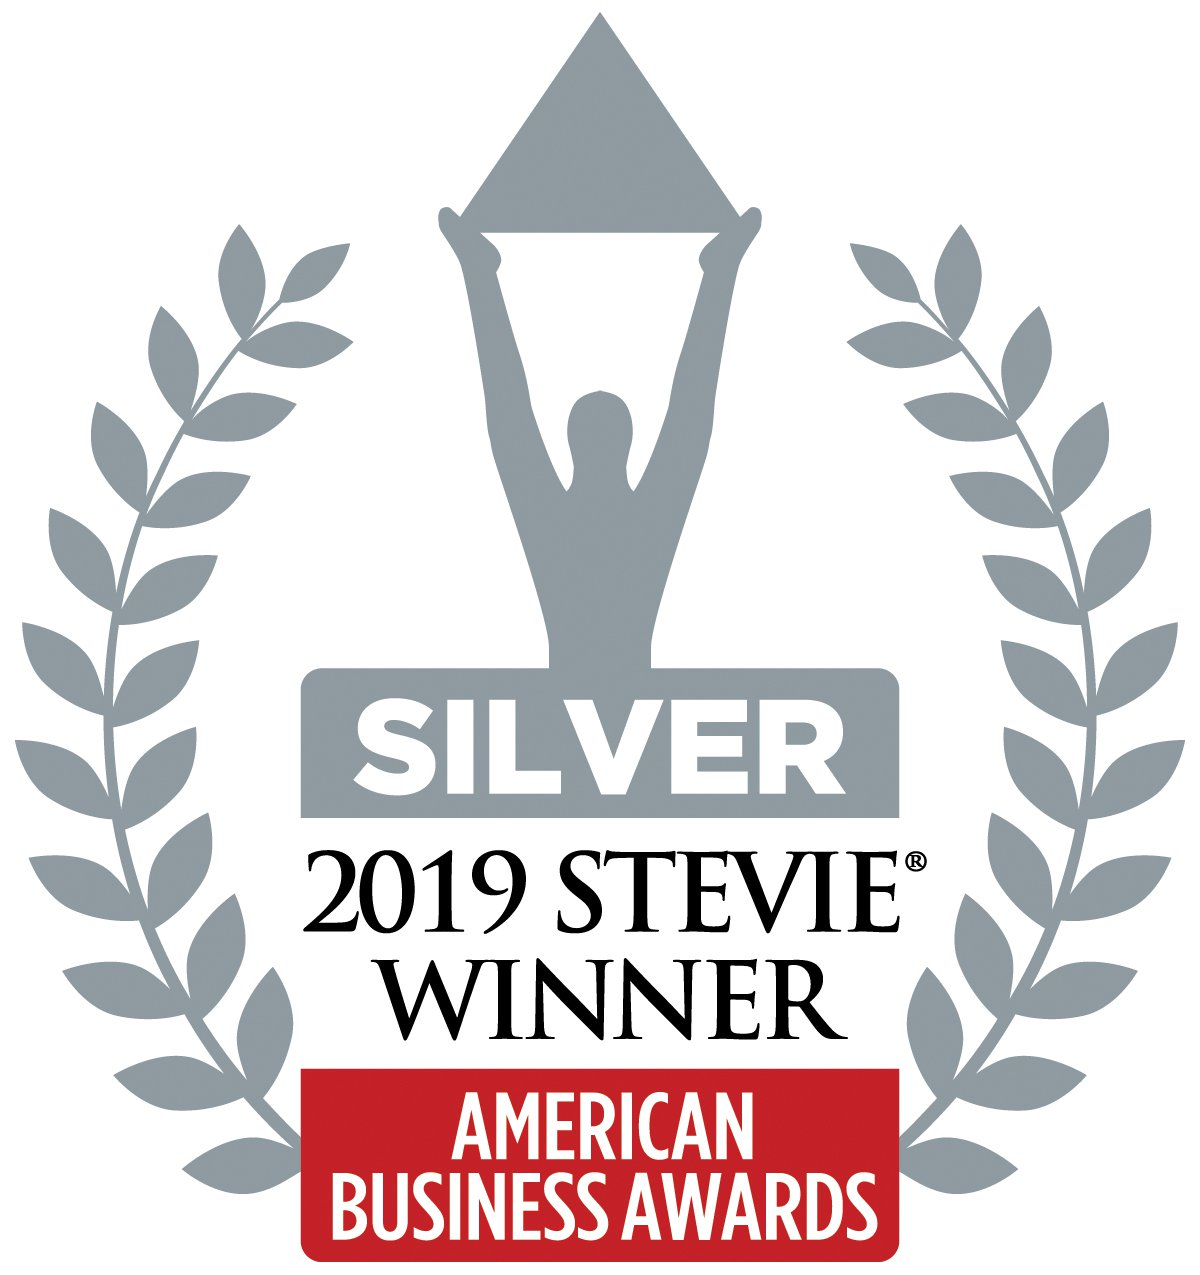 The Rplate has been awarded the Stevie Silver Award for Best New Product in the 2019 American Business Awards